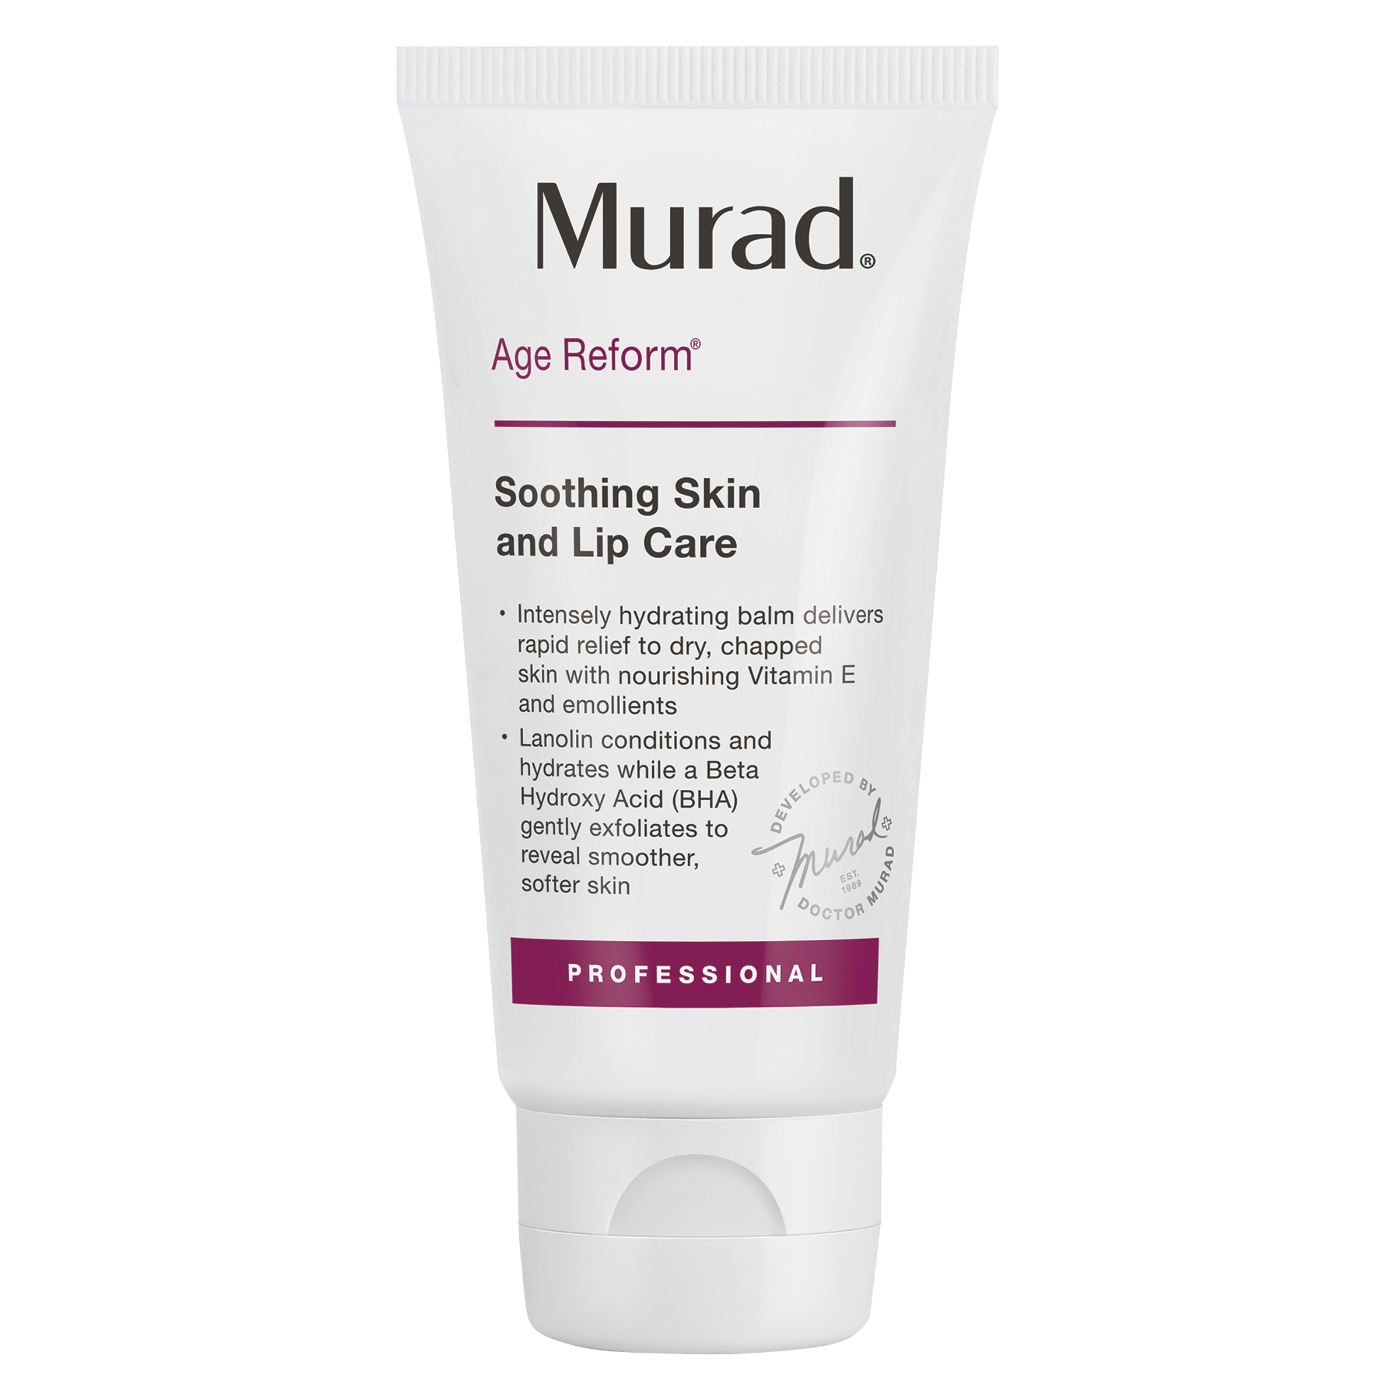 Soothing Skin and Lip Care